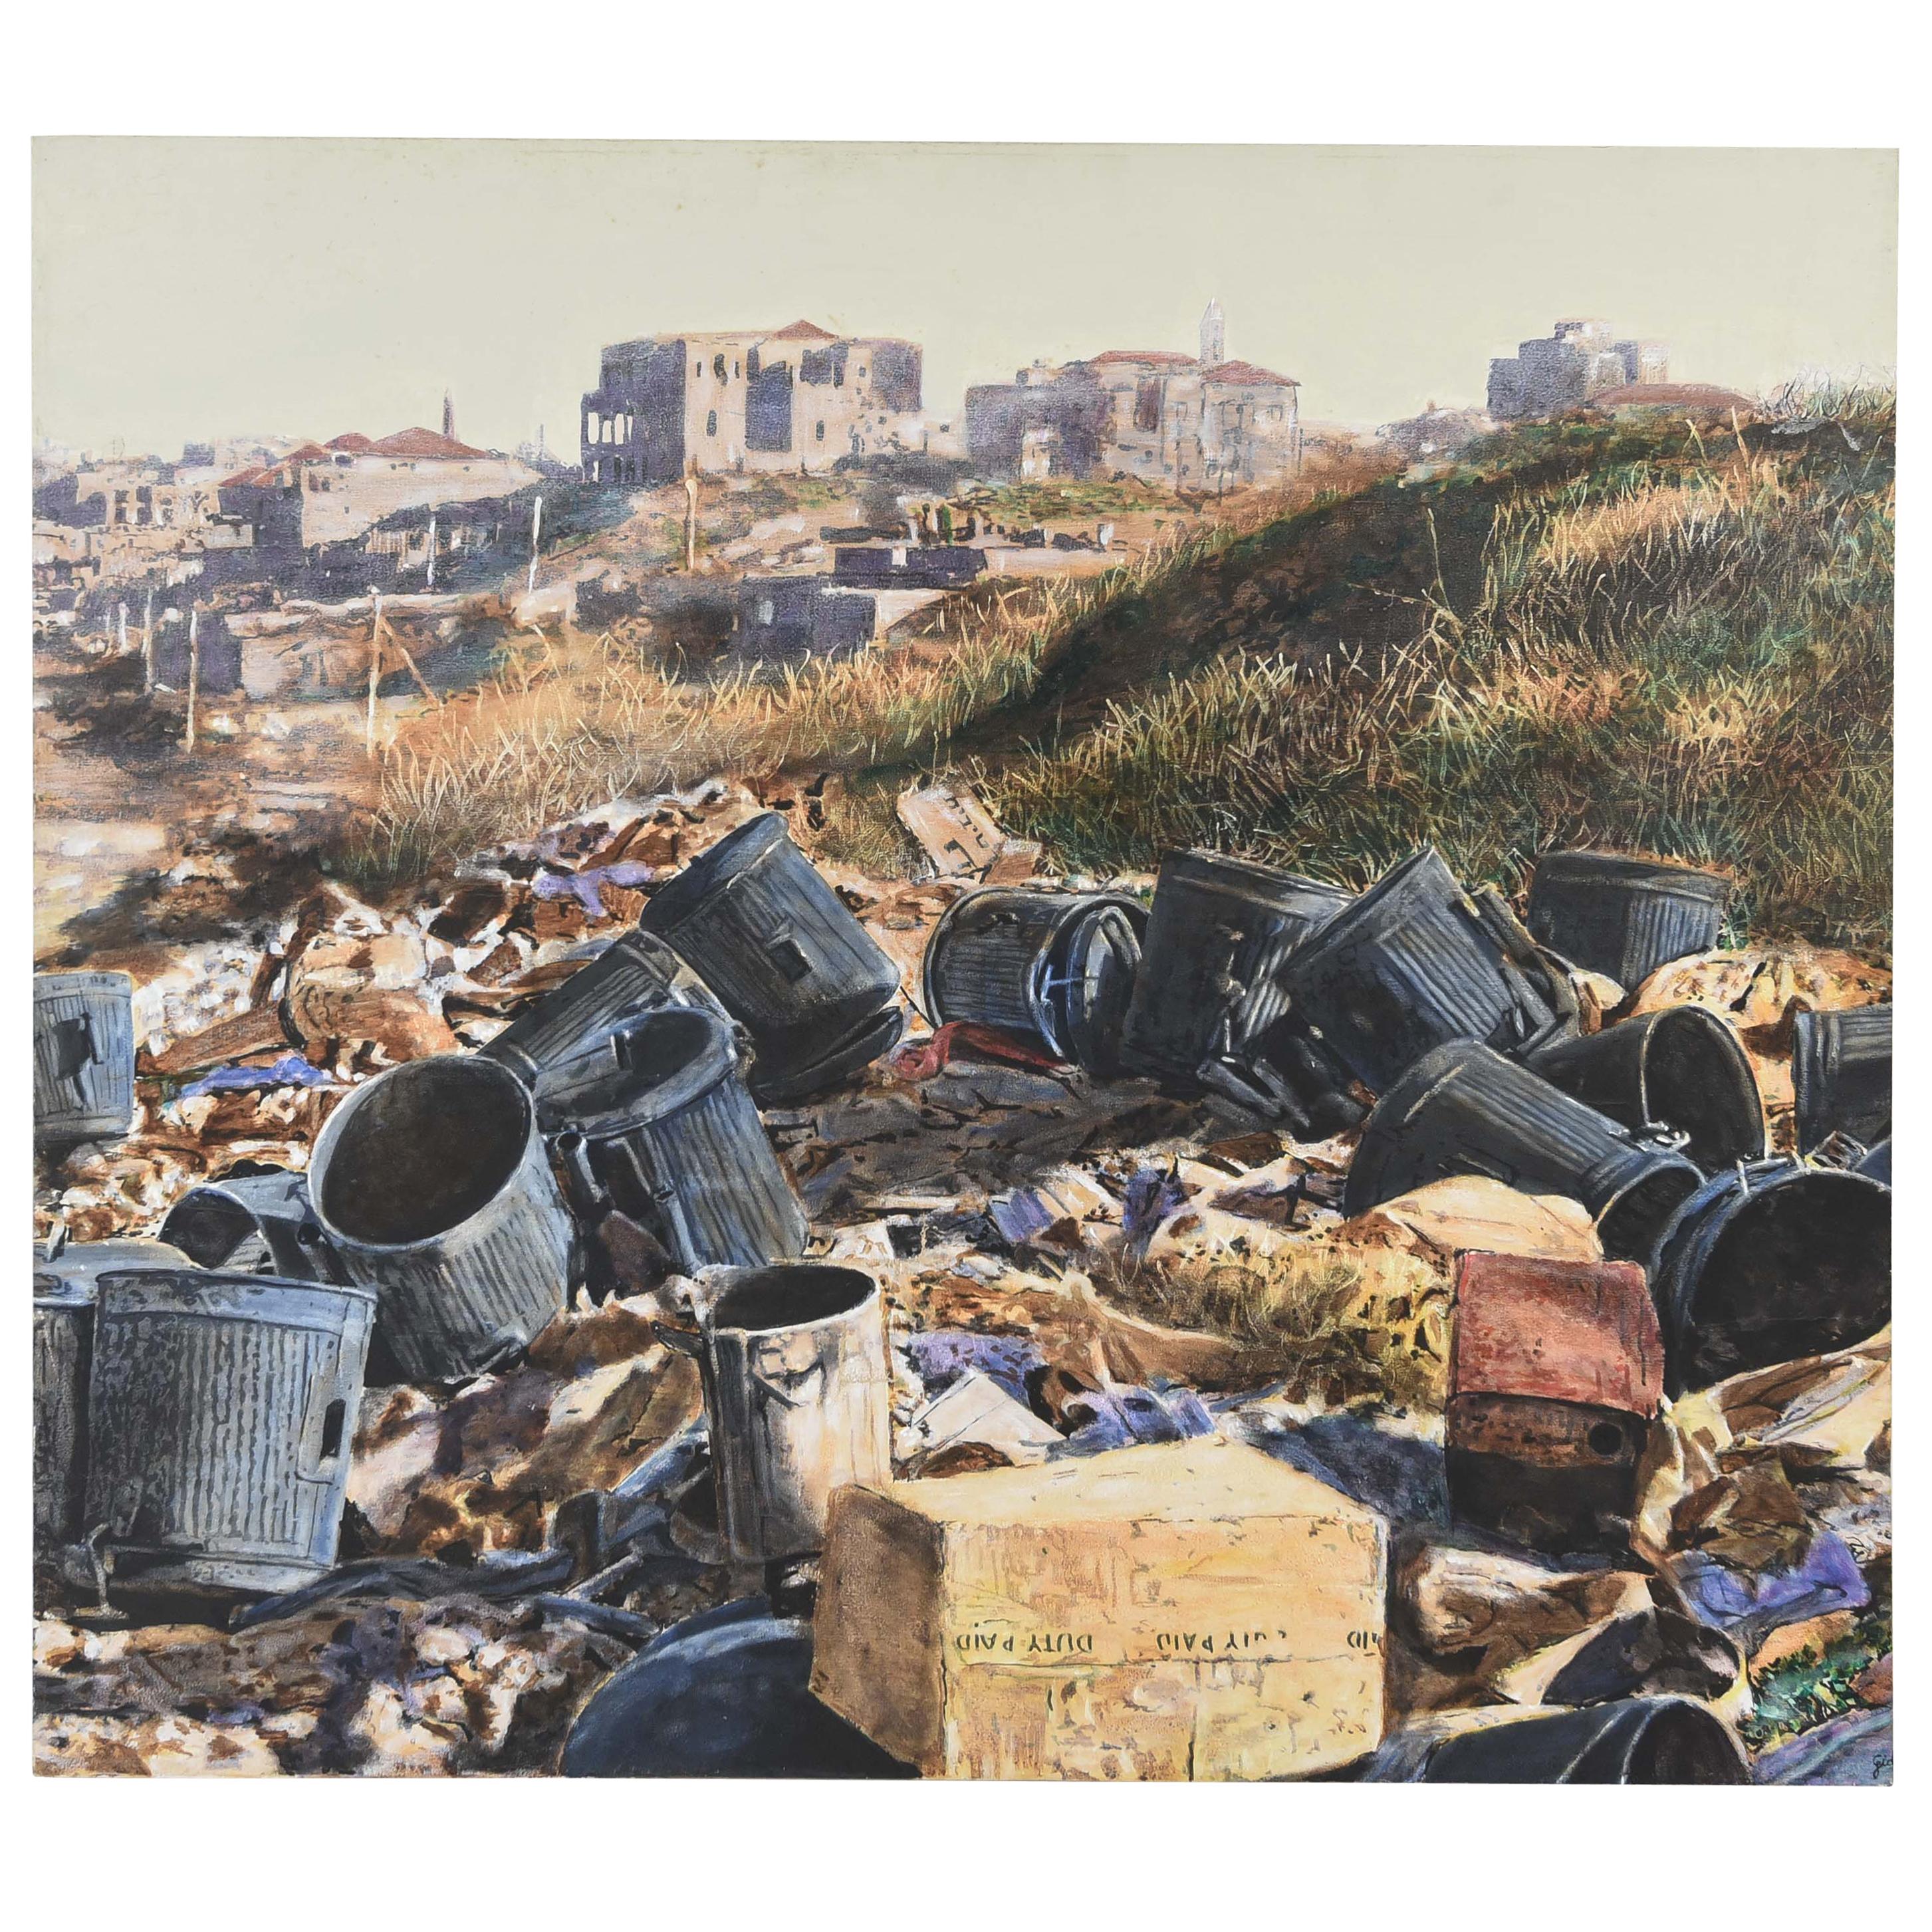 Oil on Canvas of a Landfill in Israel